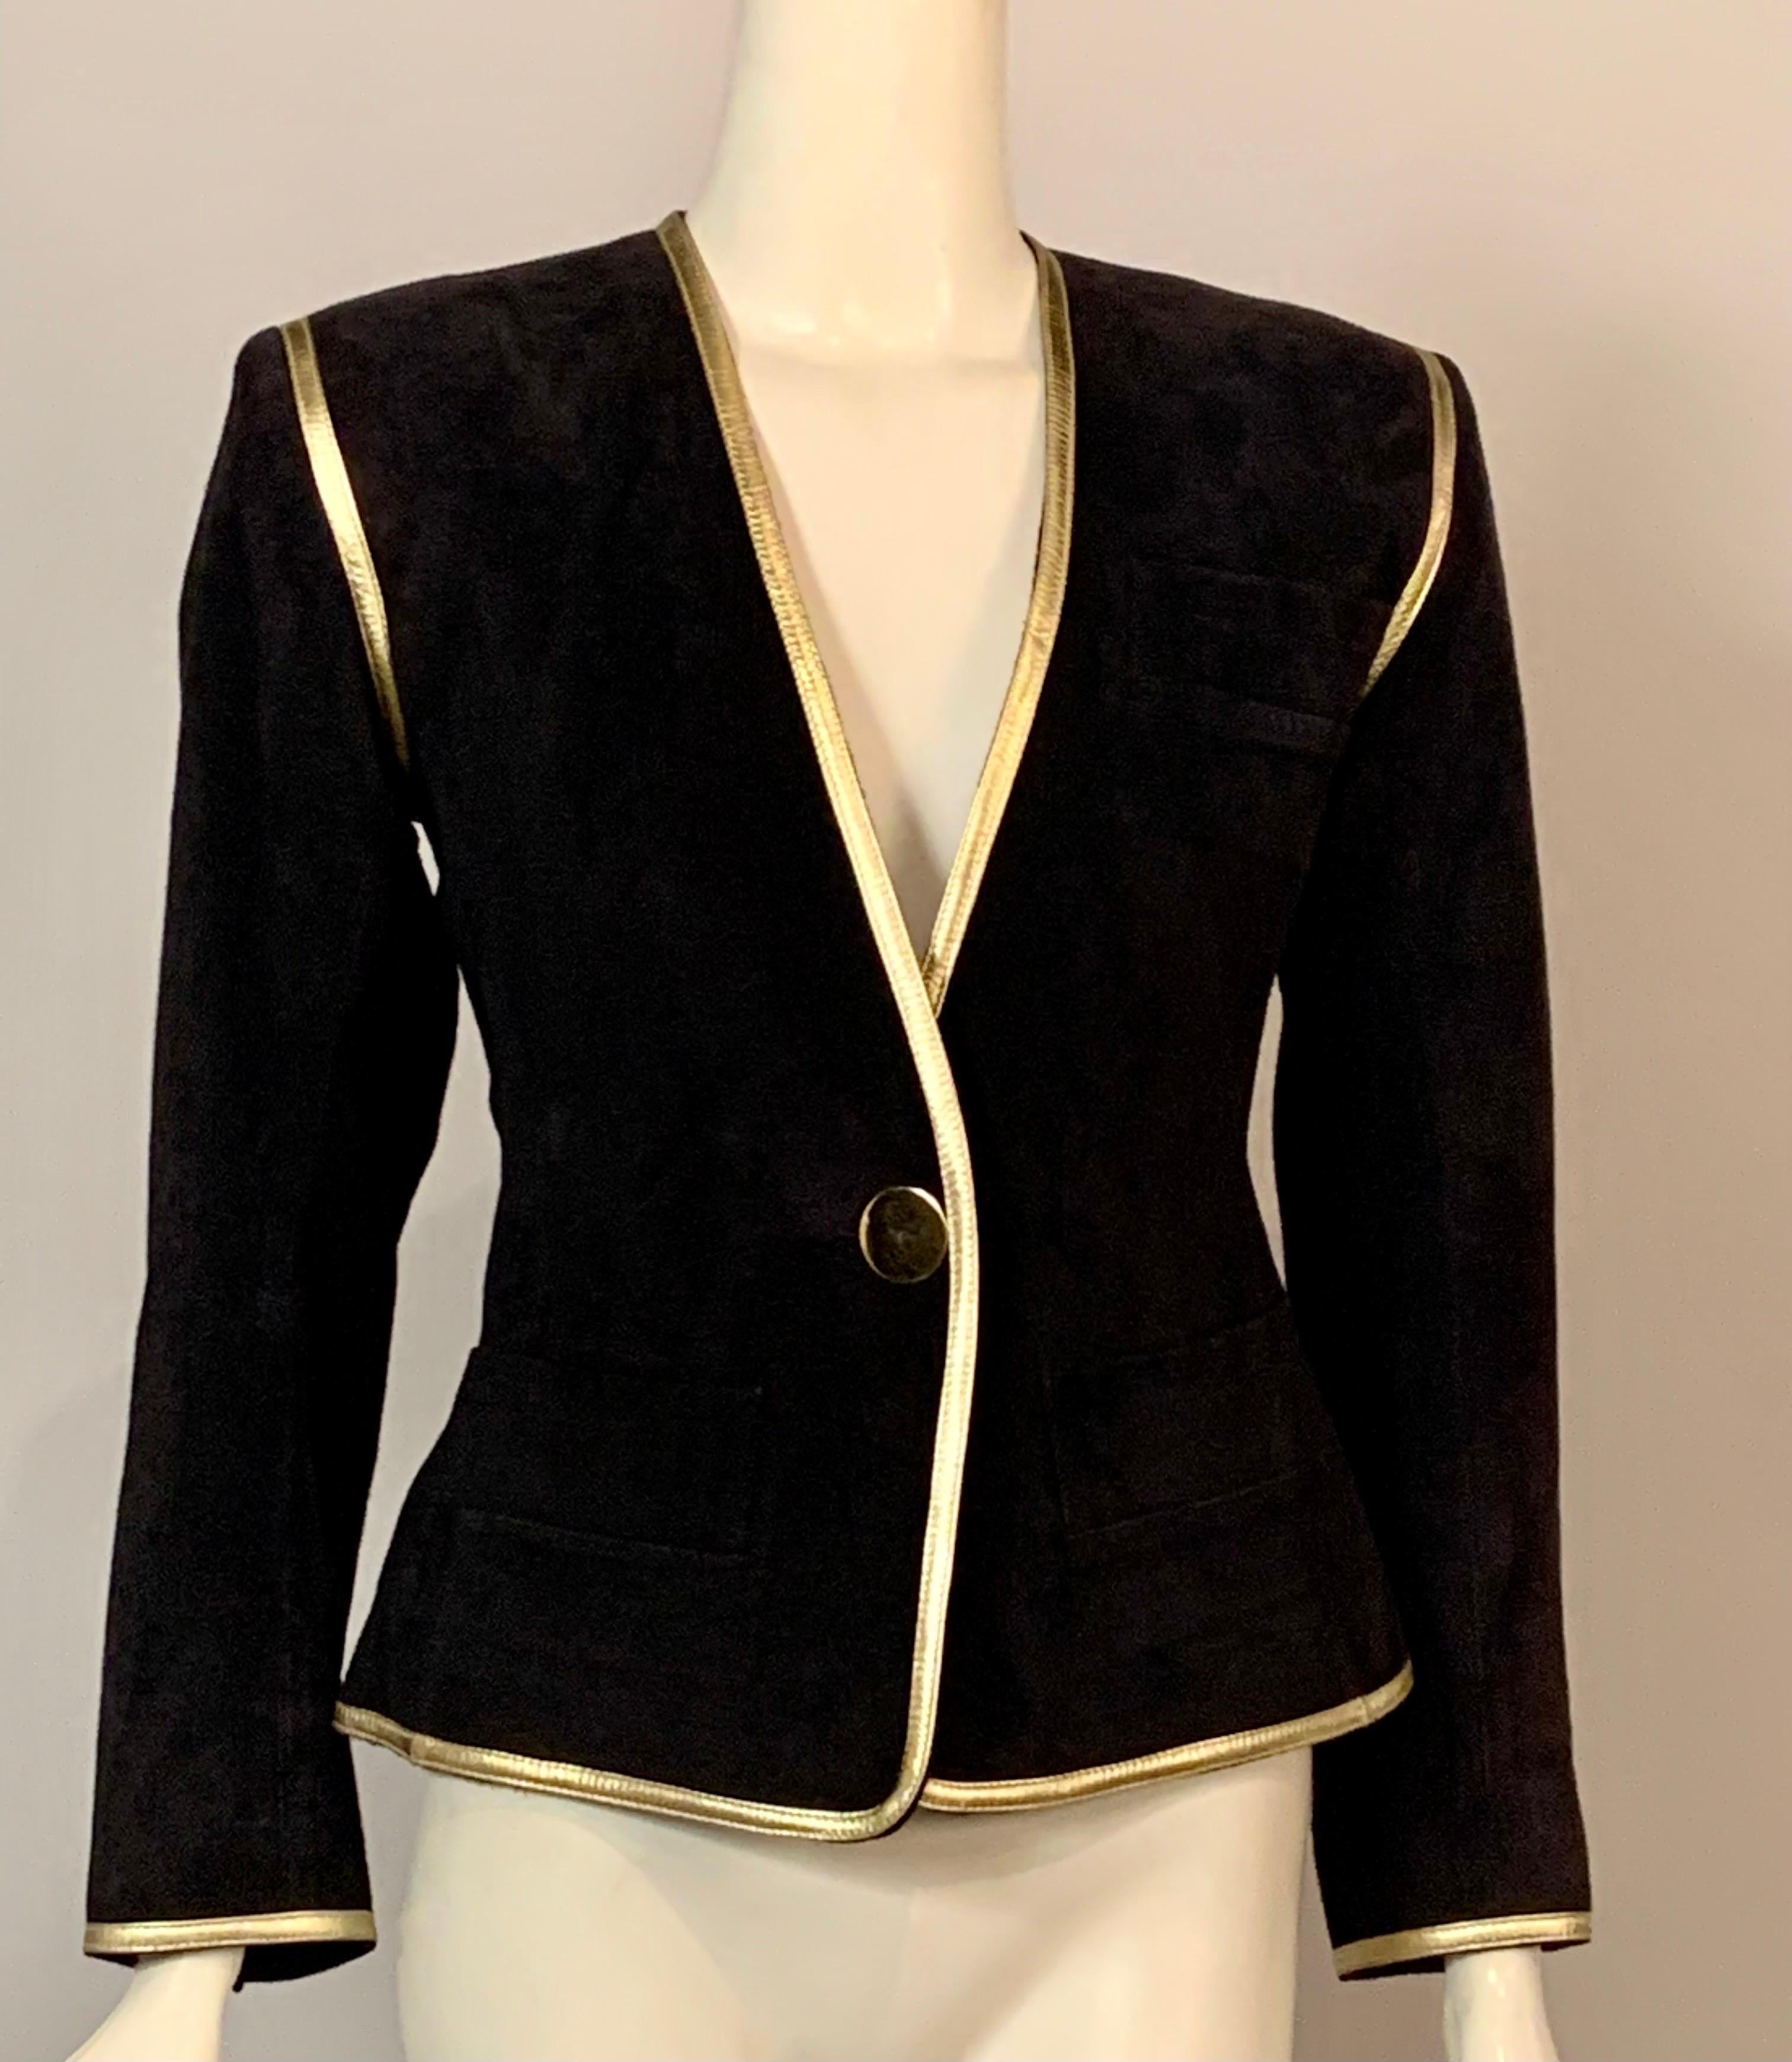 This Yves Saint Laurent jacket is so chic. A classic one button jacket in black suede is trimmed with gold leather and accented with a single brass button at the center front and on each cuff.   [Extra buttons are sewn inside]  It is lined in black